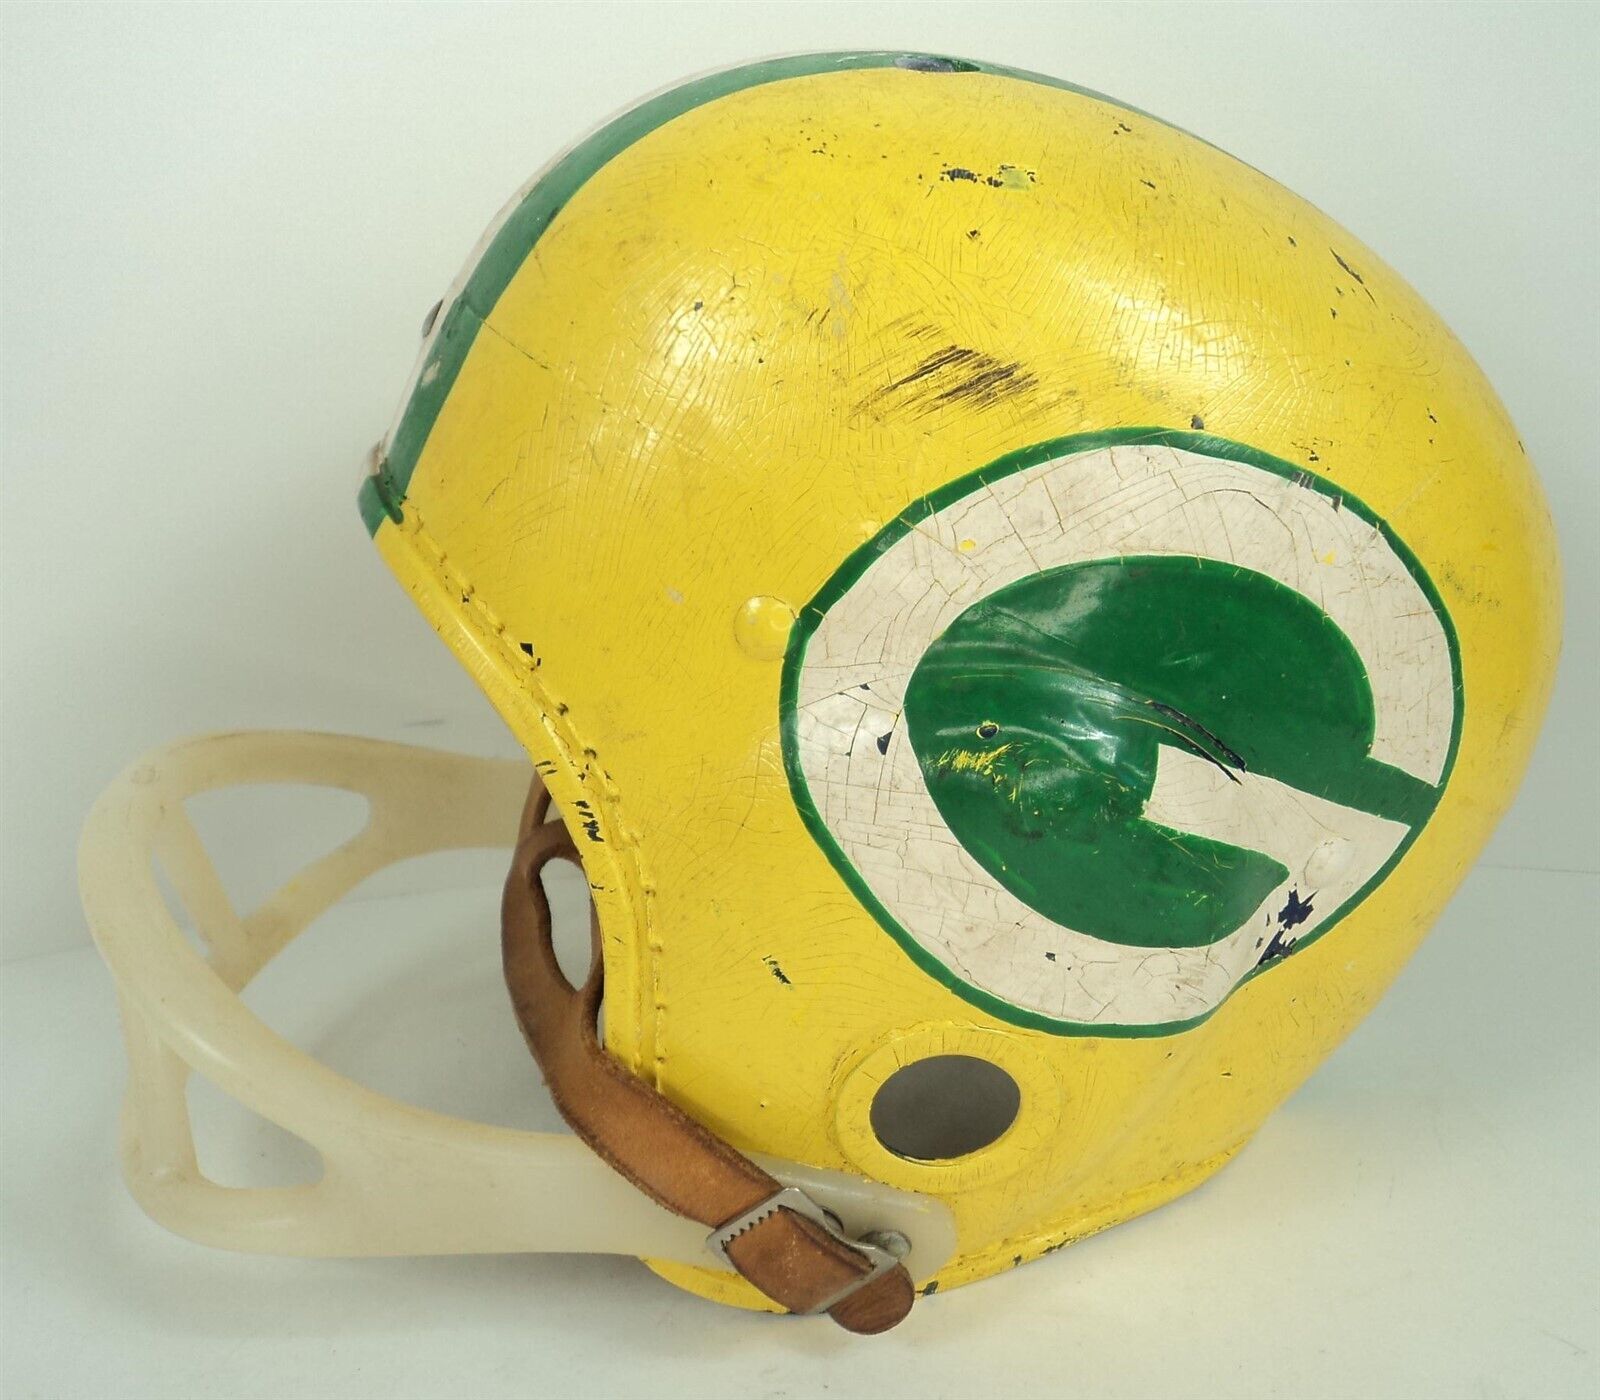 VTG Wilson Child-Size Green Bay Packers Football Helmet w/ Leather Chin Strap - $48.37